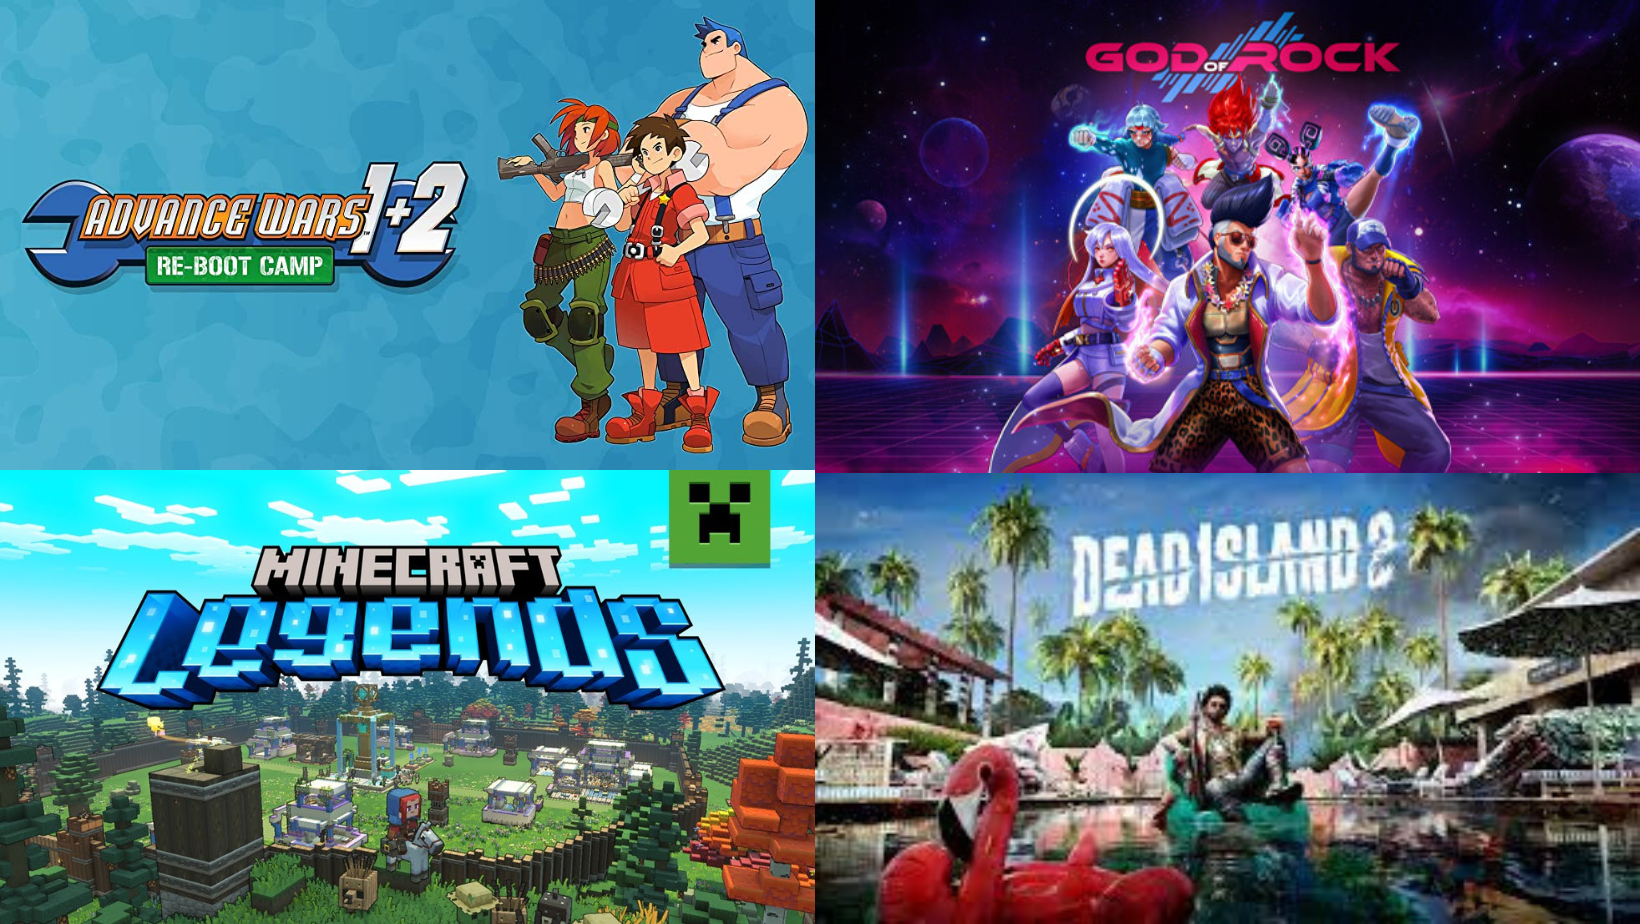 Dead Island 2 joins this week's upcoming games :